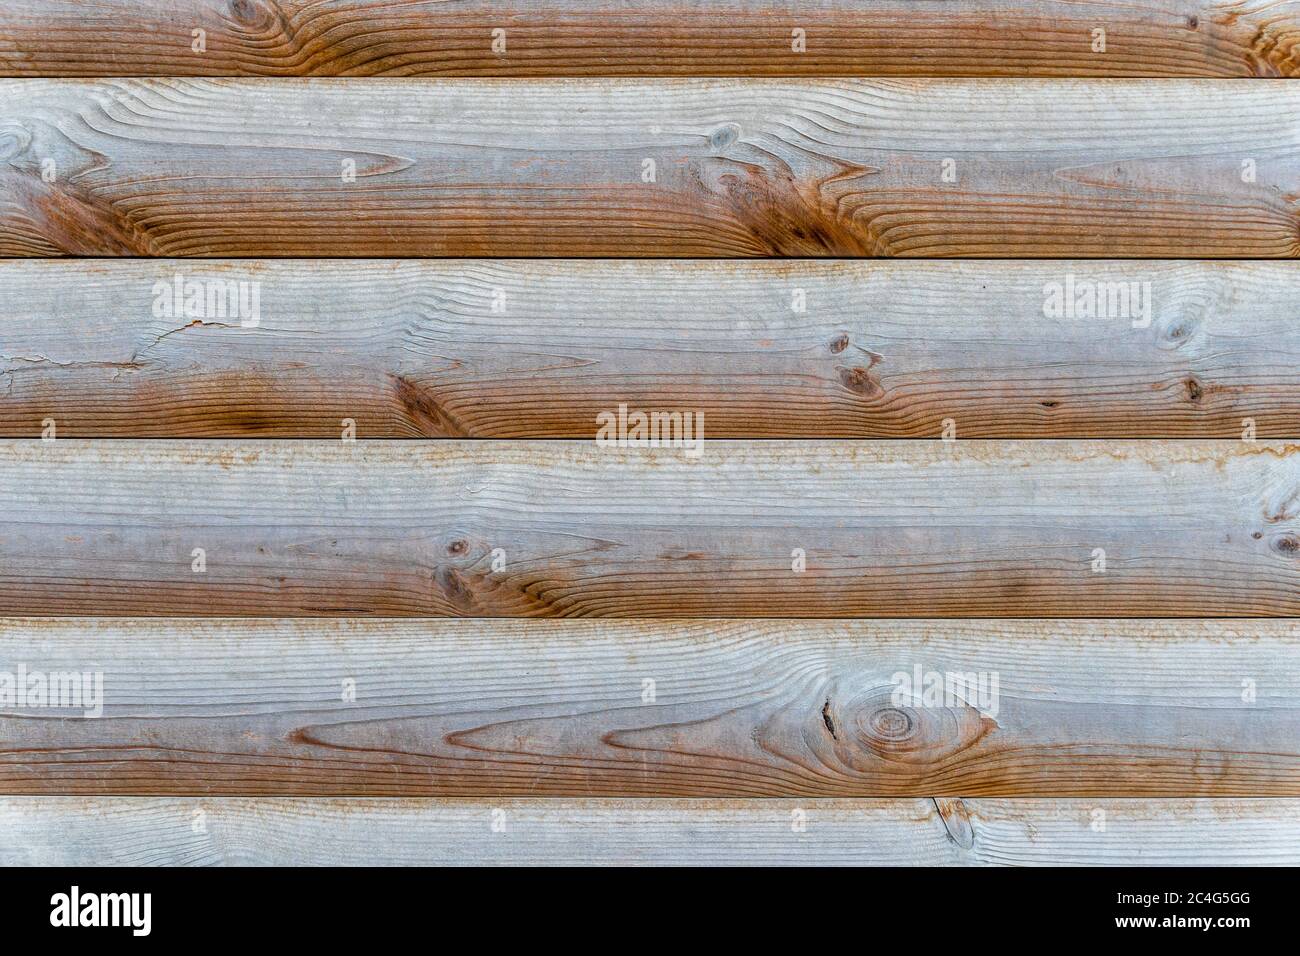 horizontal pine wood planks texture. abstract nature background with surface wooden pattern panels. free space for add picture and illustration for Stock Photo